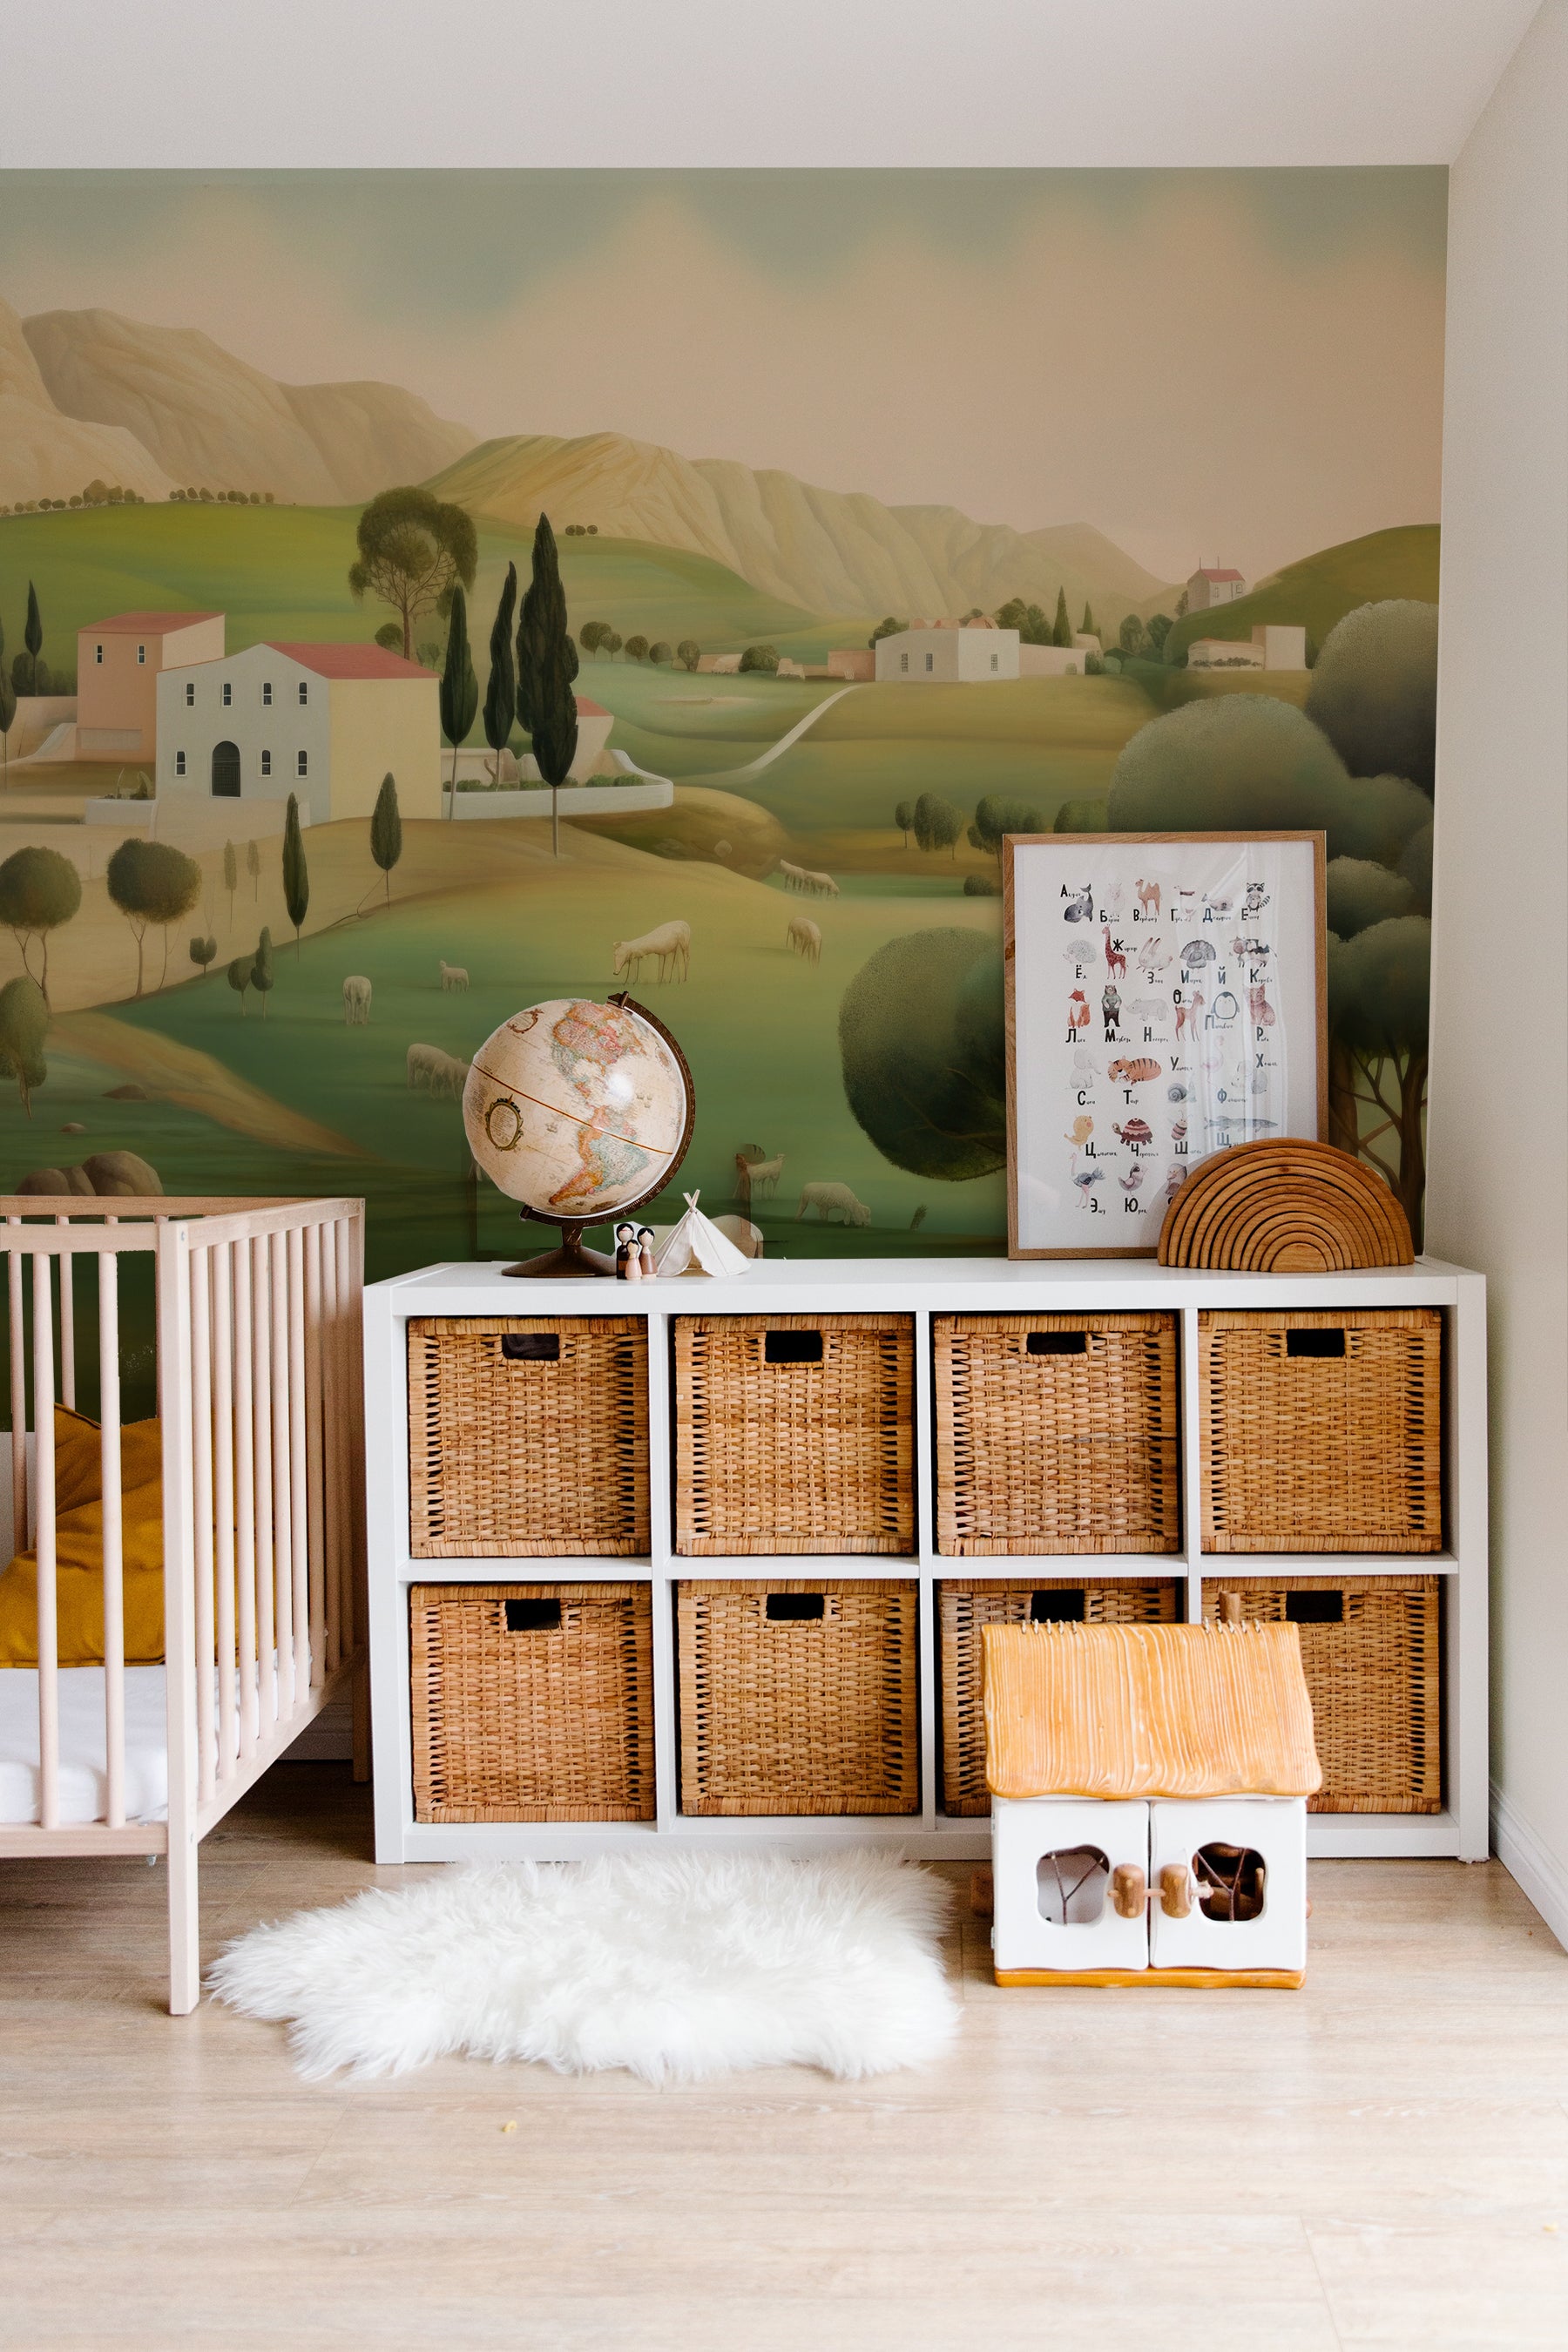 Nursery room showcasing a pastoral landscape mural with a crib, wicker storage baskets, and a plush white rug.